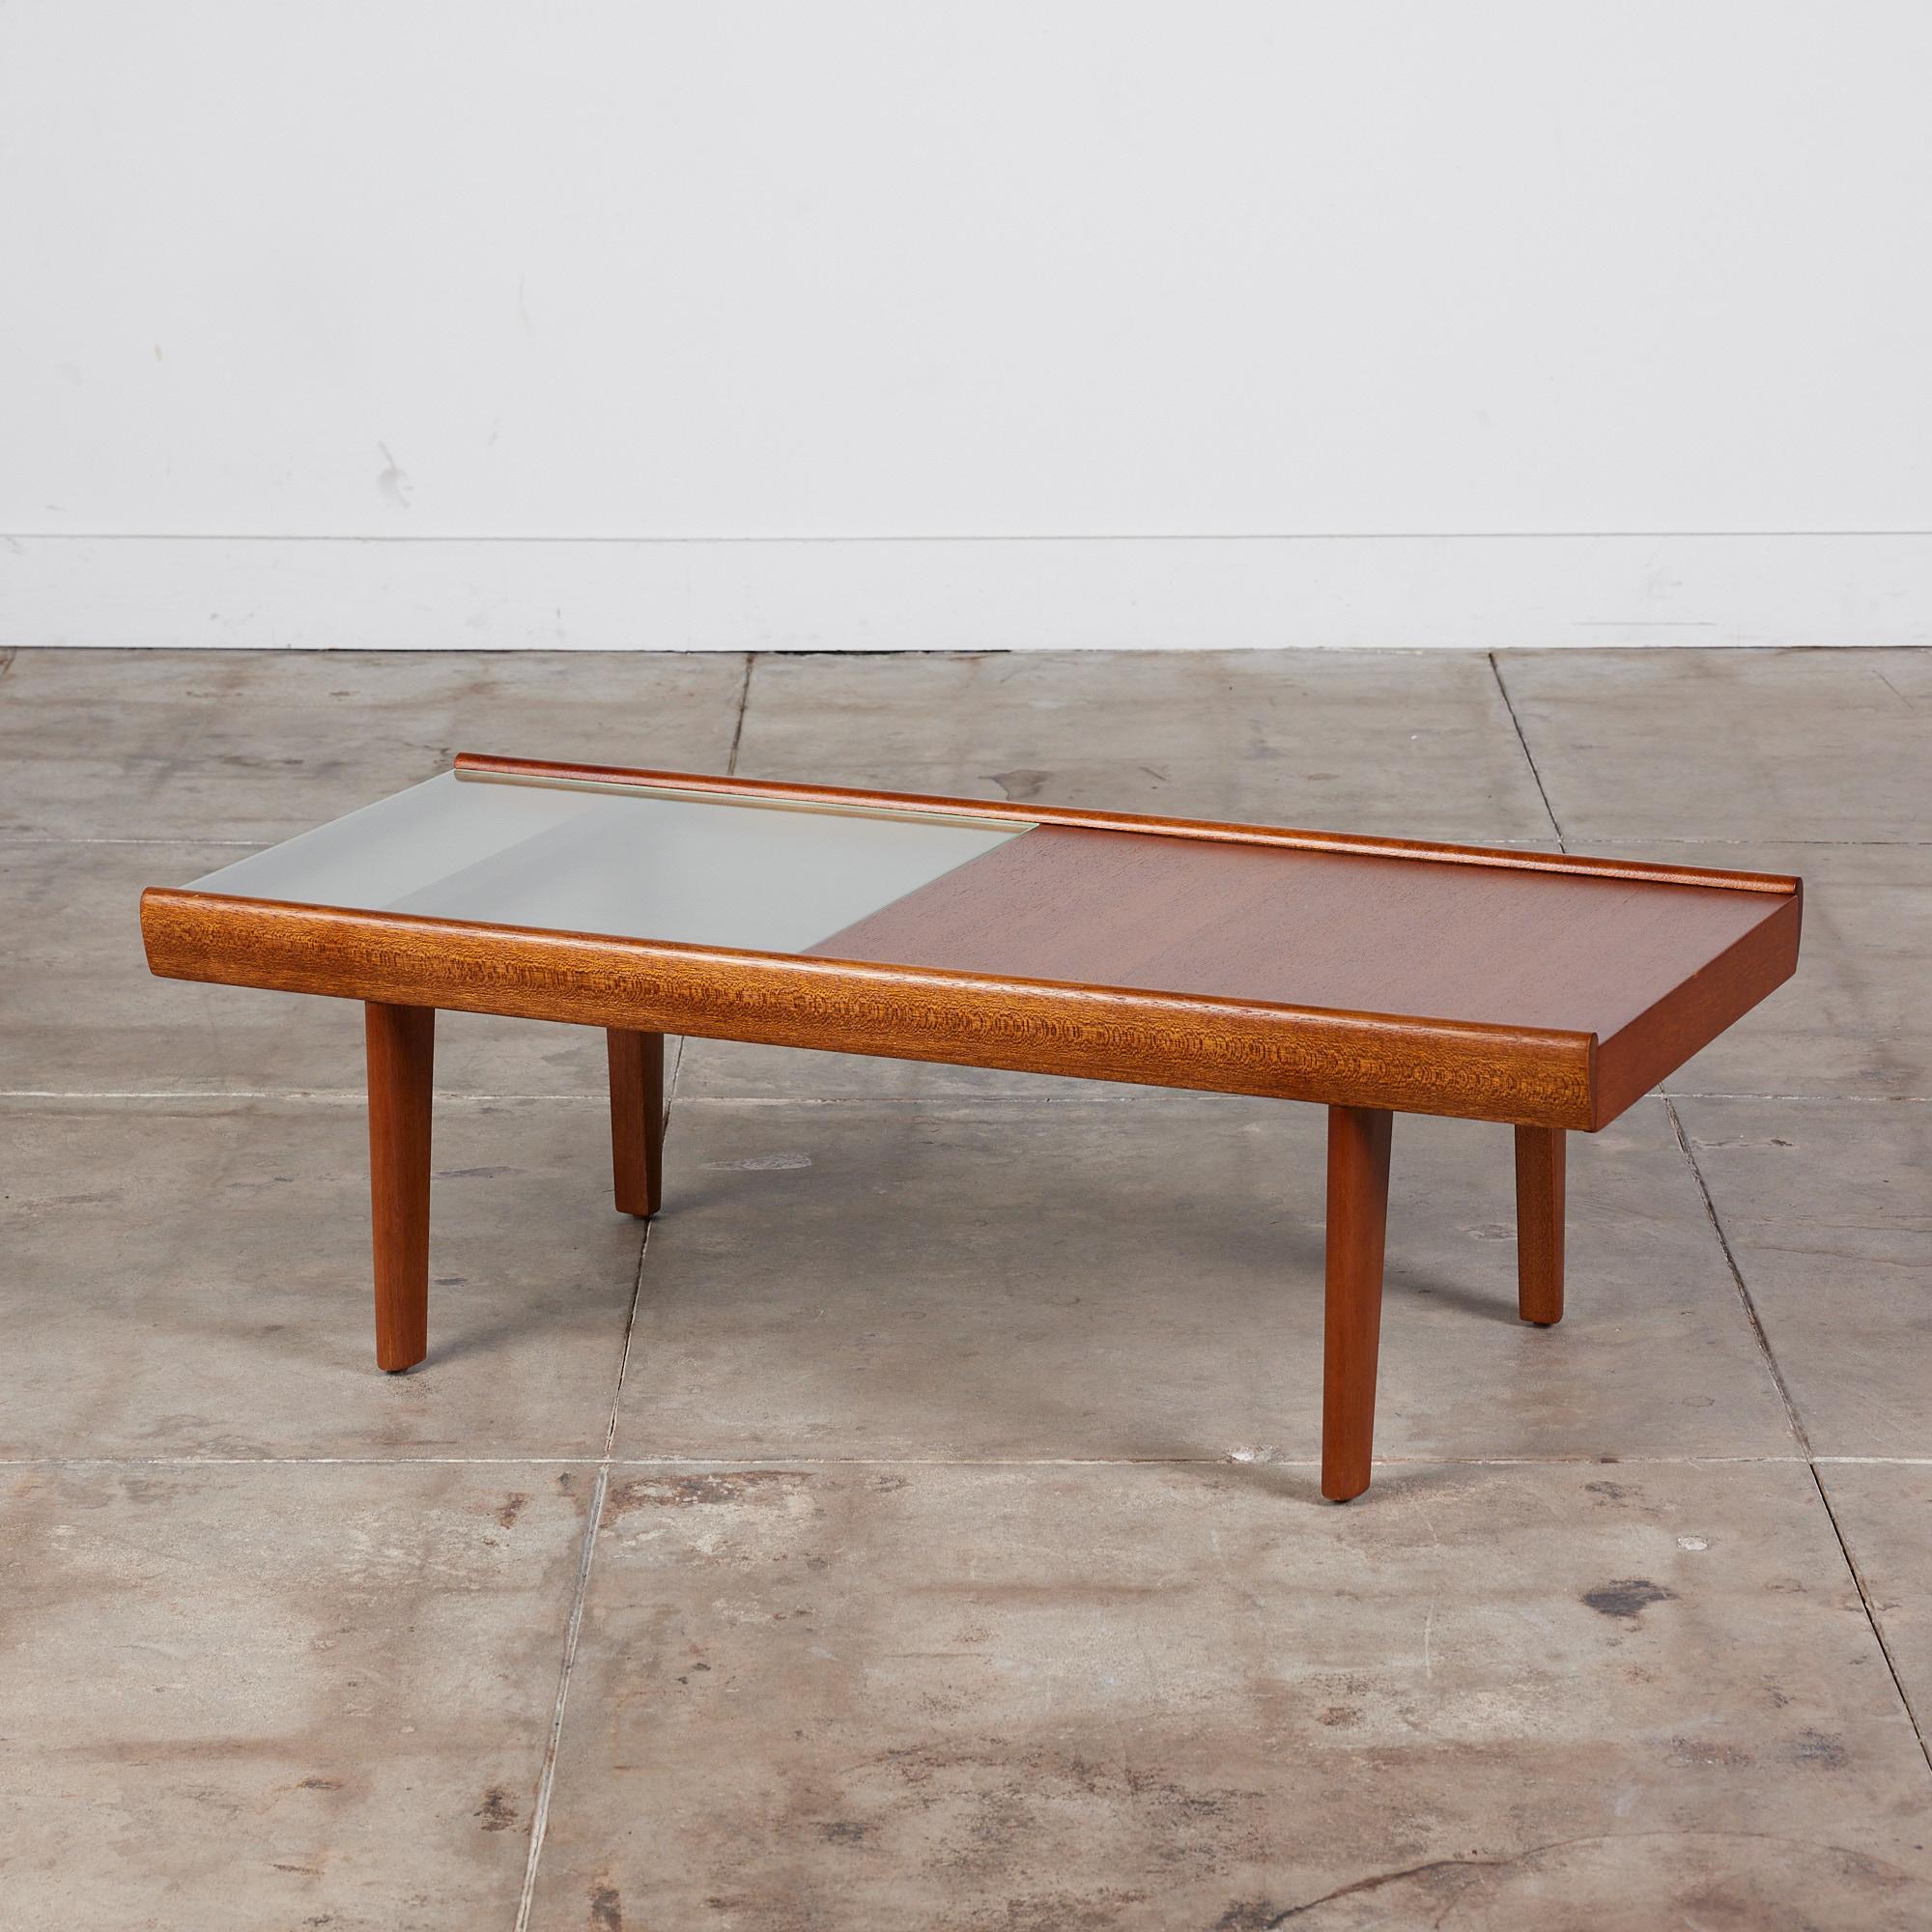 Rectangular coffee table by John Keal for Brown Saltman, c.1950s, USA. The table features a mix of textured glass and mahogany. The mahogany side of the table slides open to reveal hidden storage. The table rests on tapered dowel